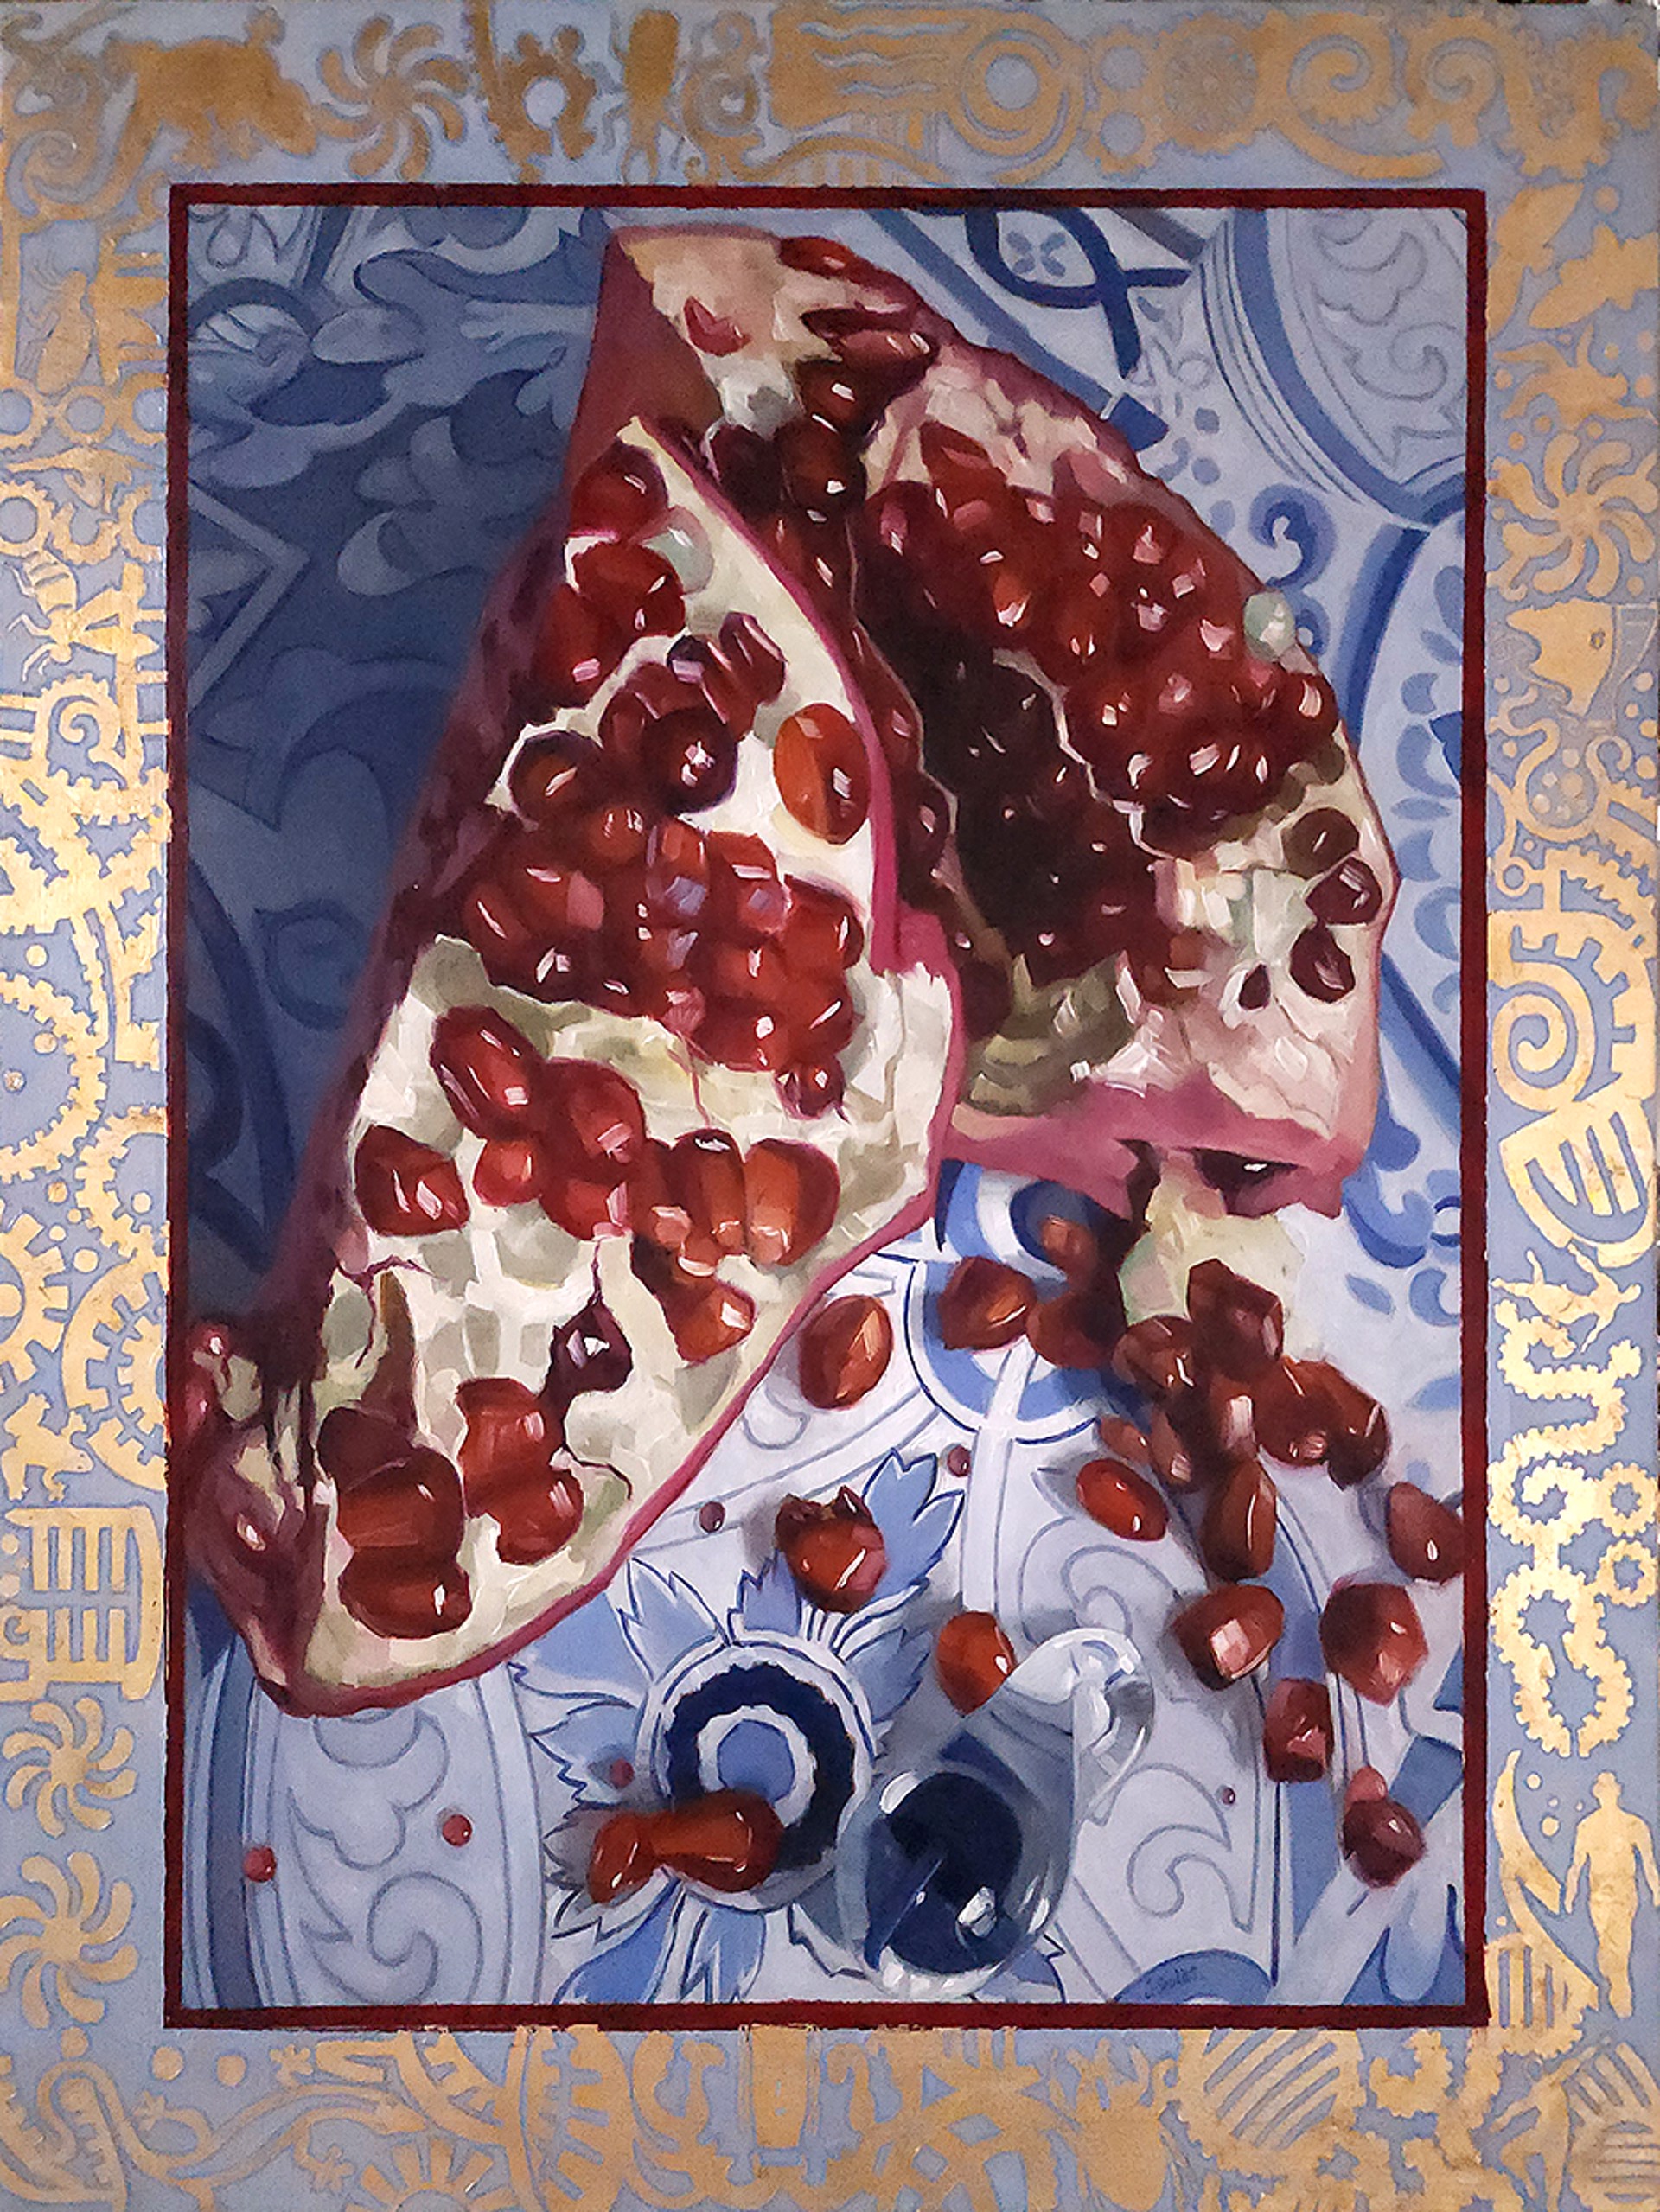 Pomegranate on a Blue Cloth by Jacques Soulas